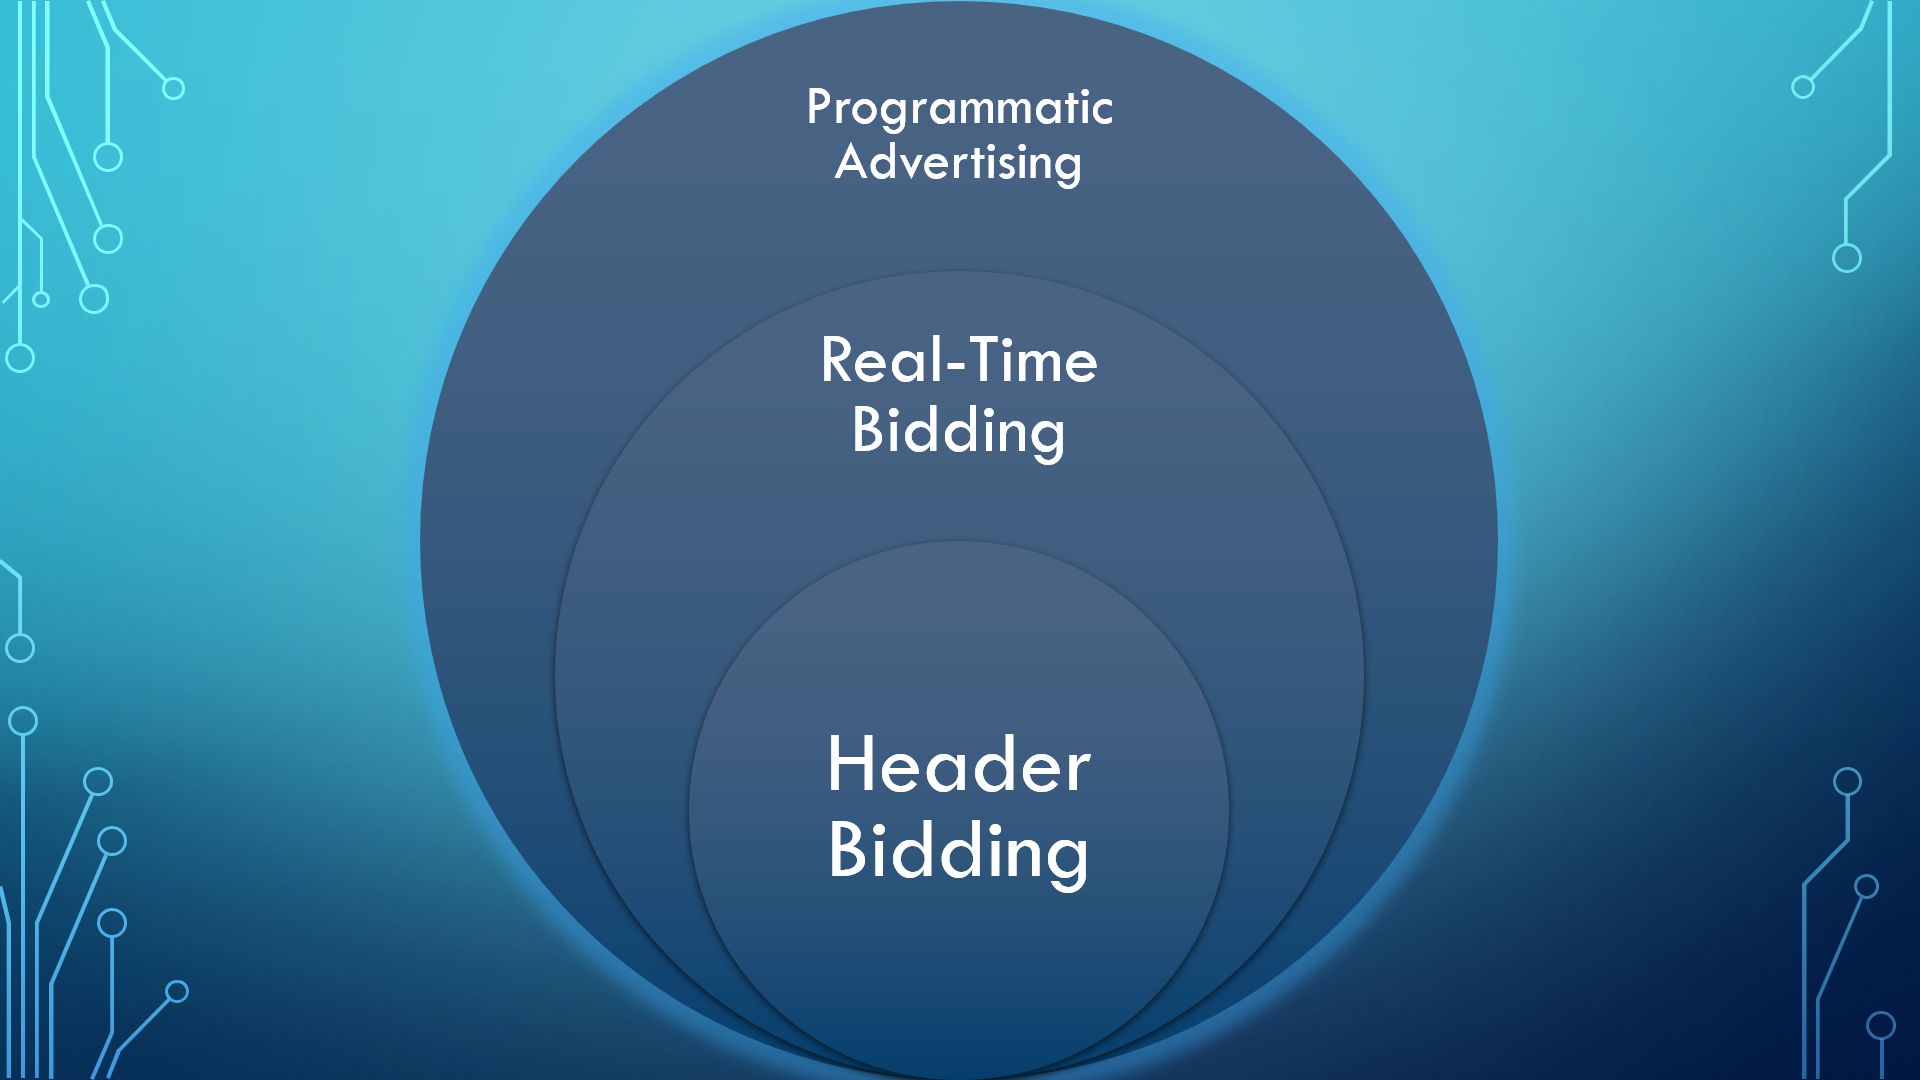 How to Be Pragmatic about Programmatic Advertising